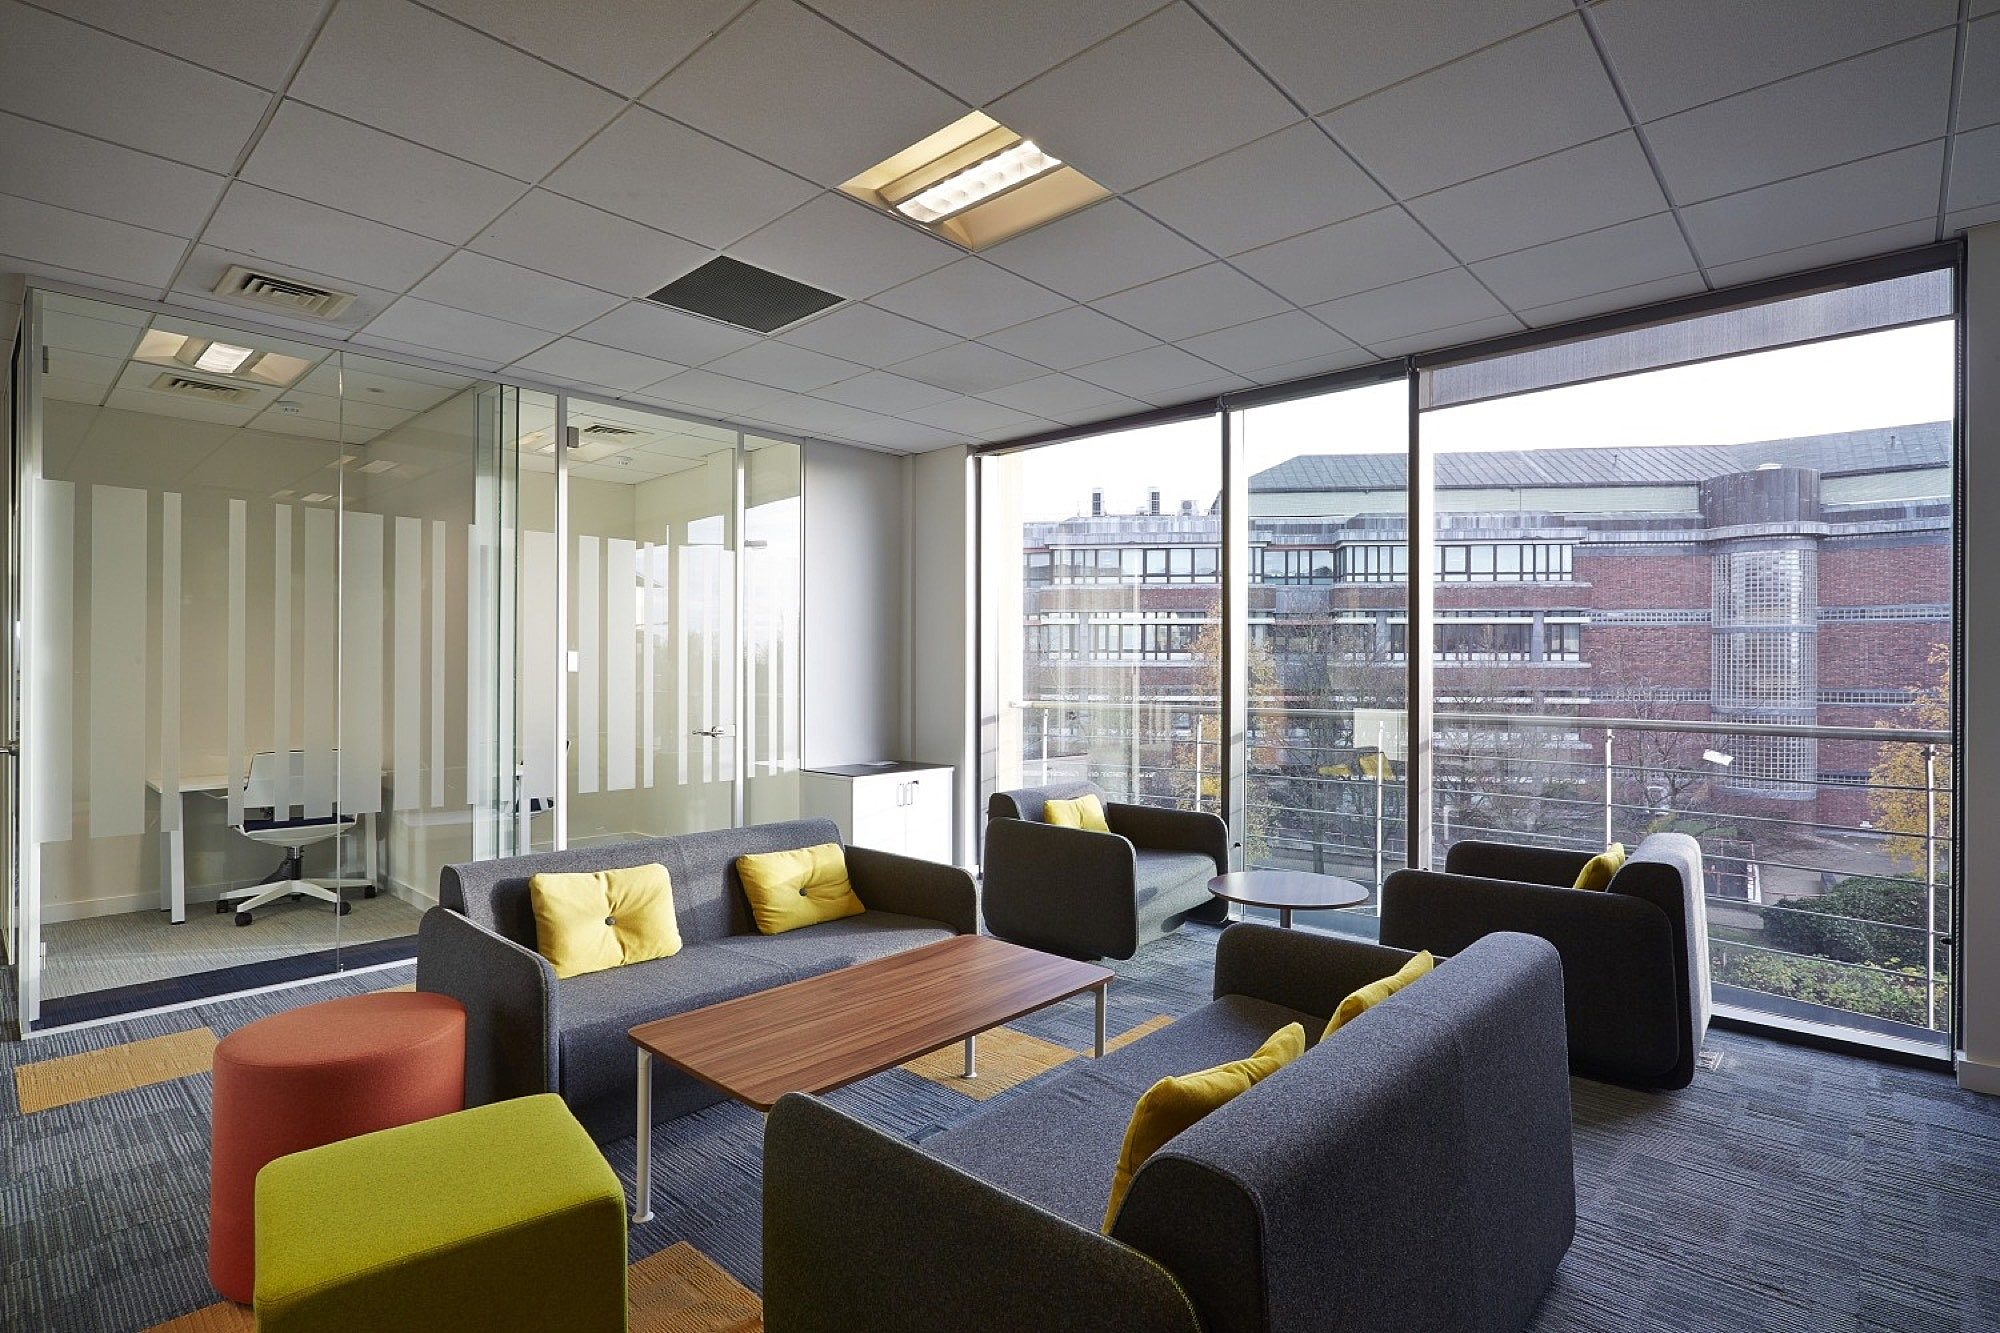 Npower breakout area fit out